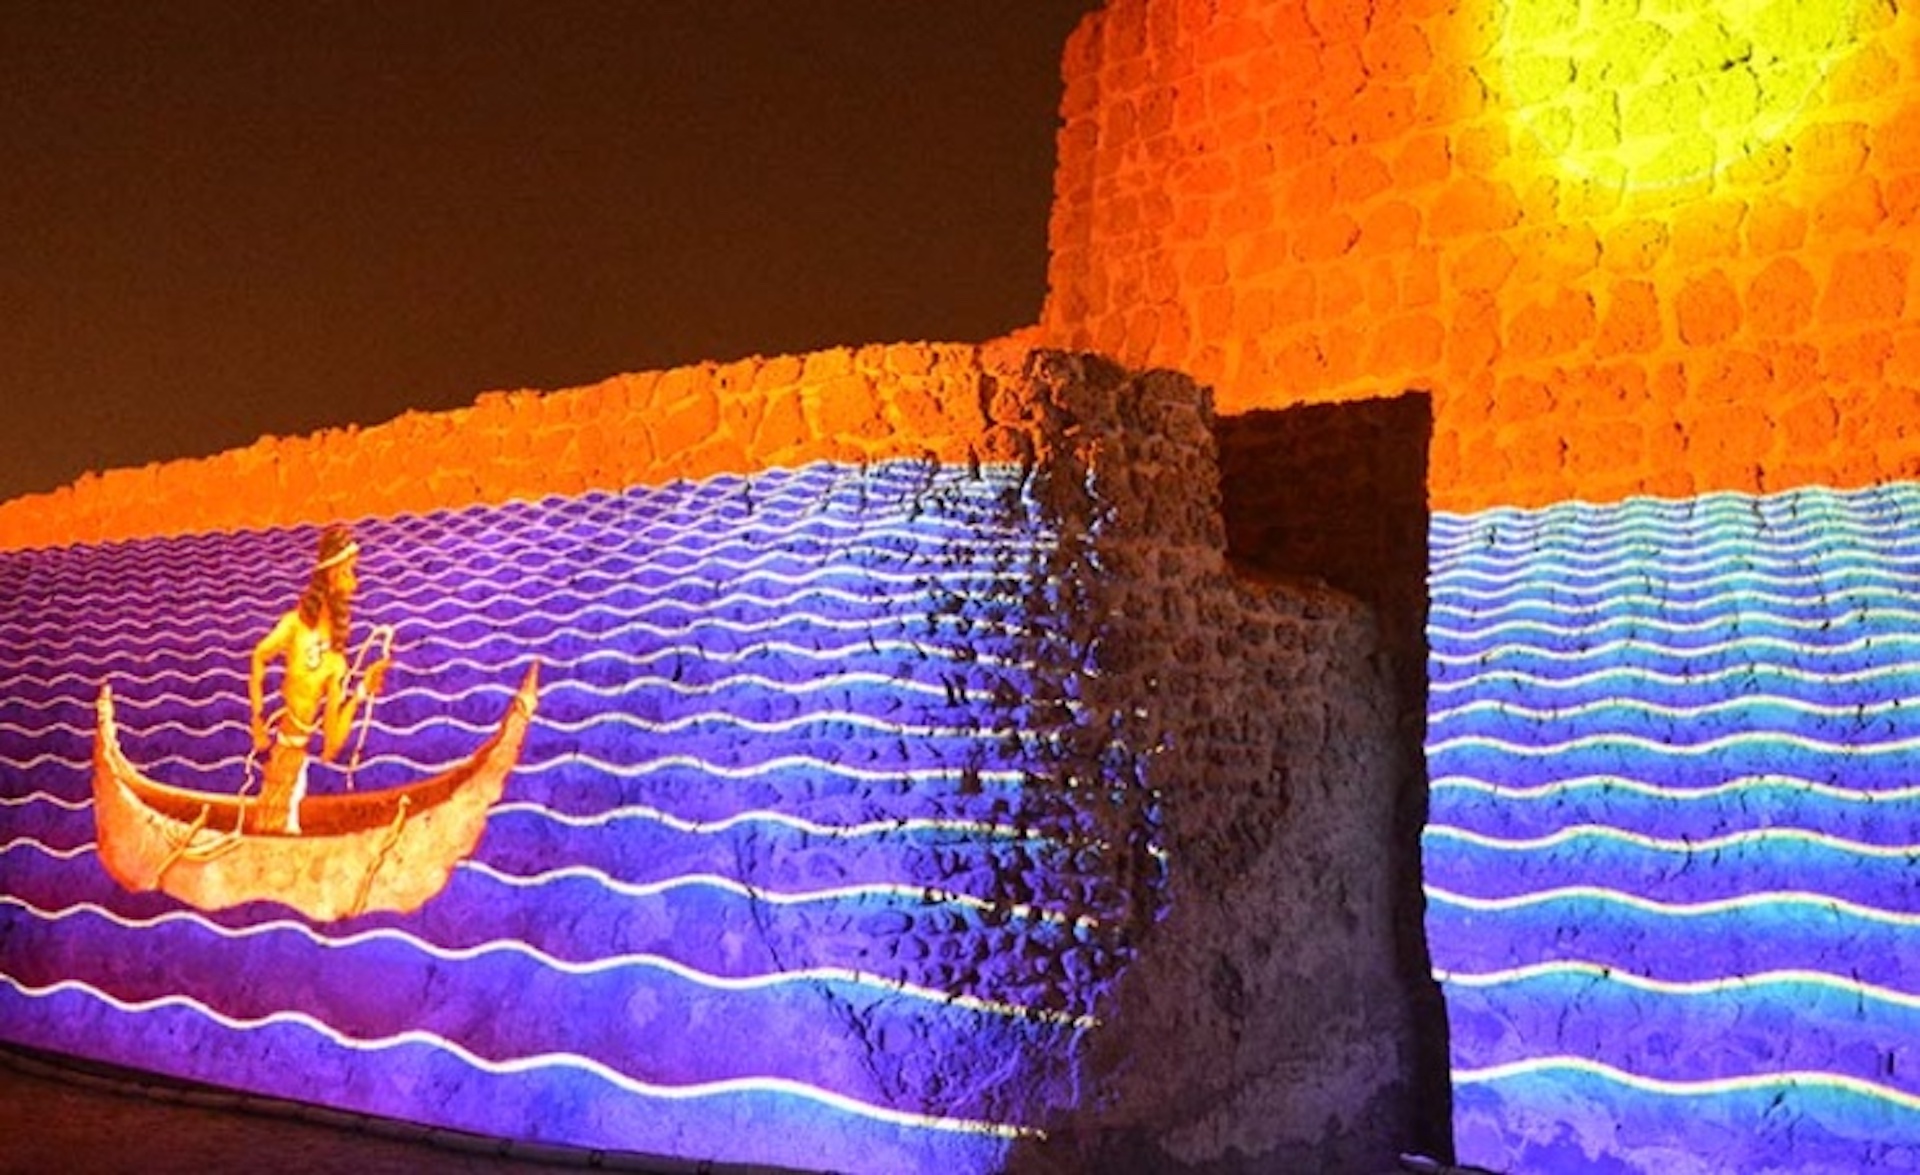 Bahrain Fort to host biweekly sound and light shows